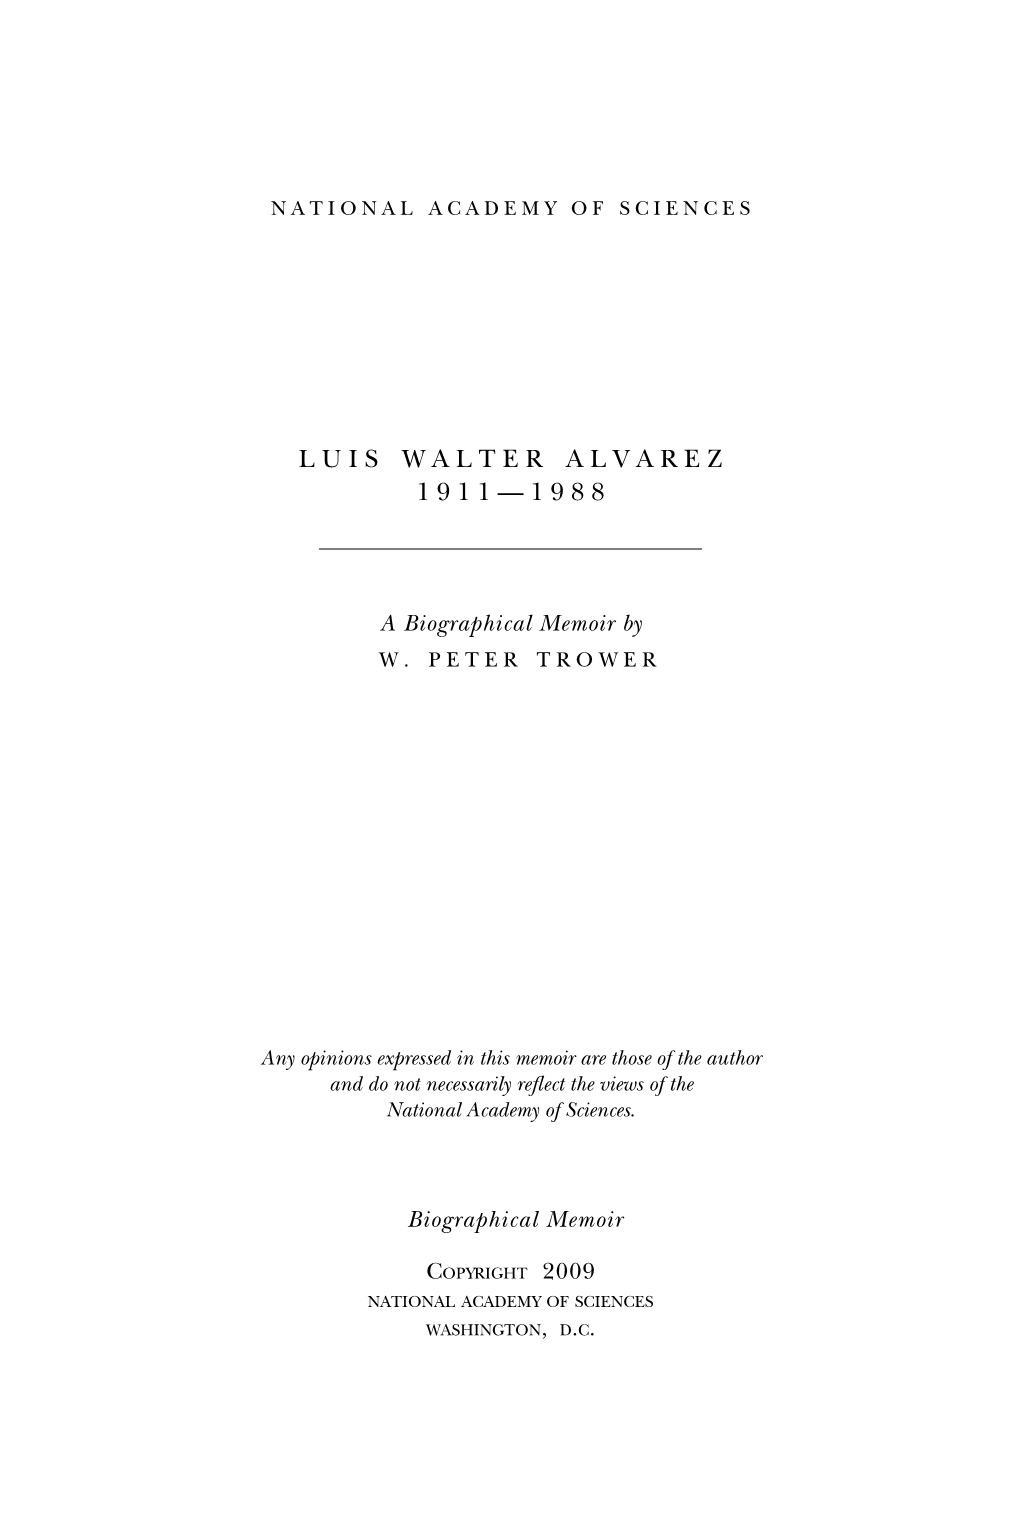 Luis W. Alvarez with Commentary by His Students and Colleagues